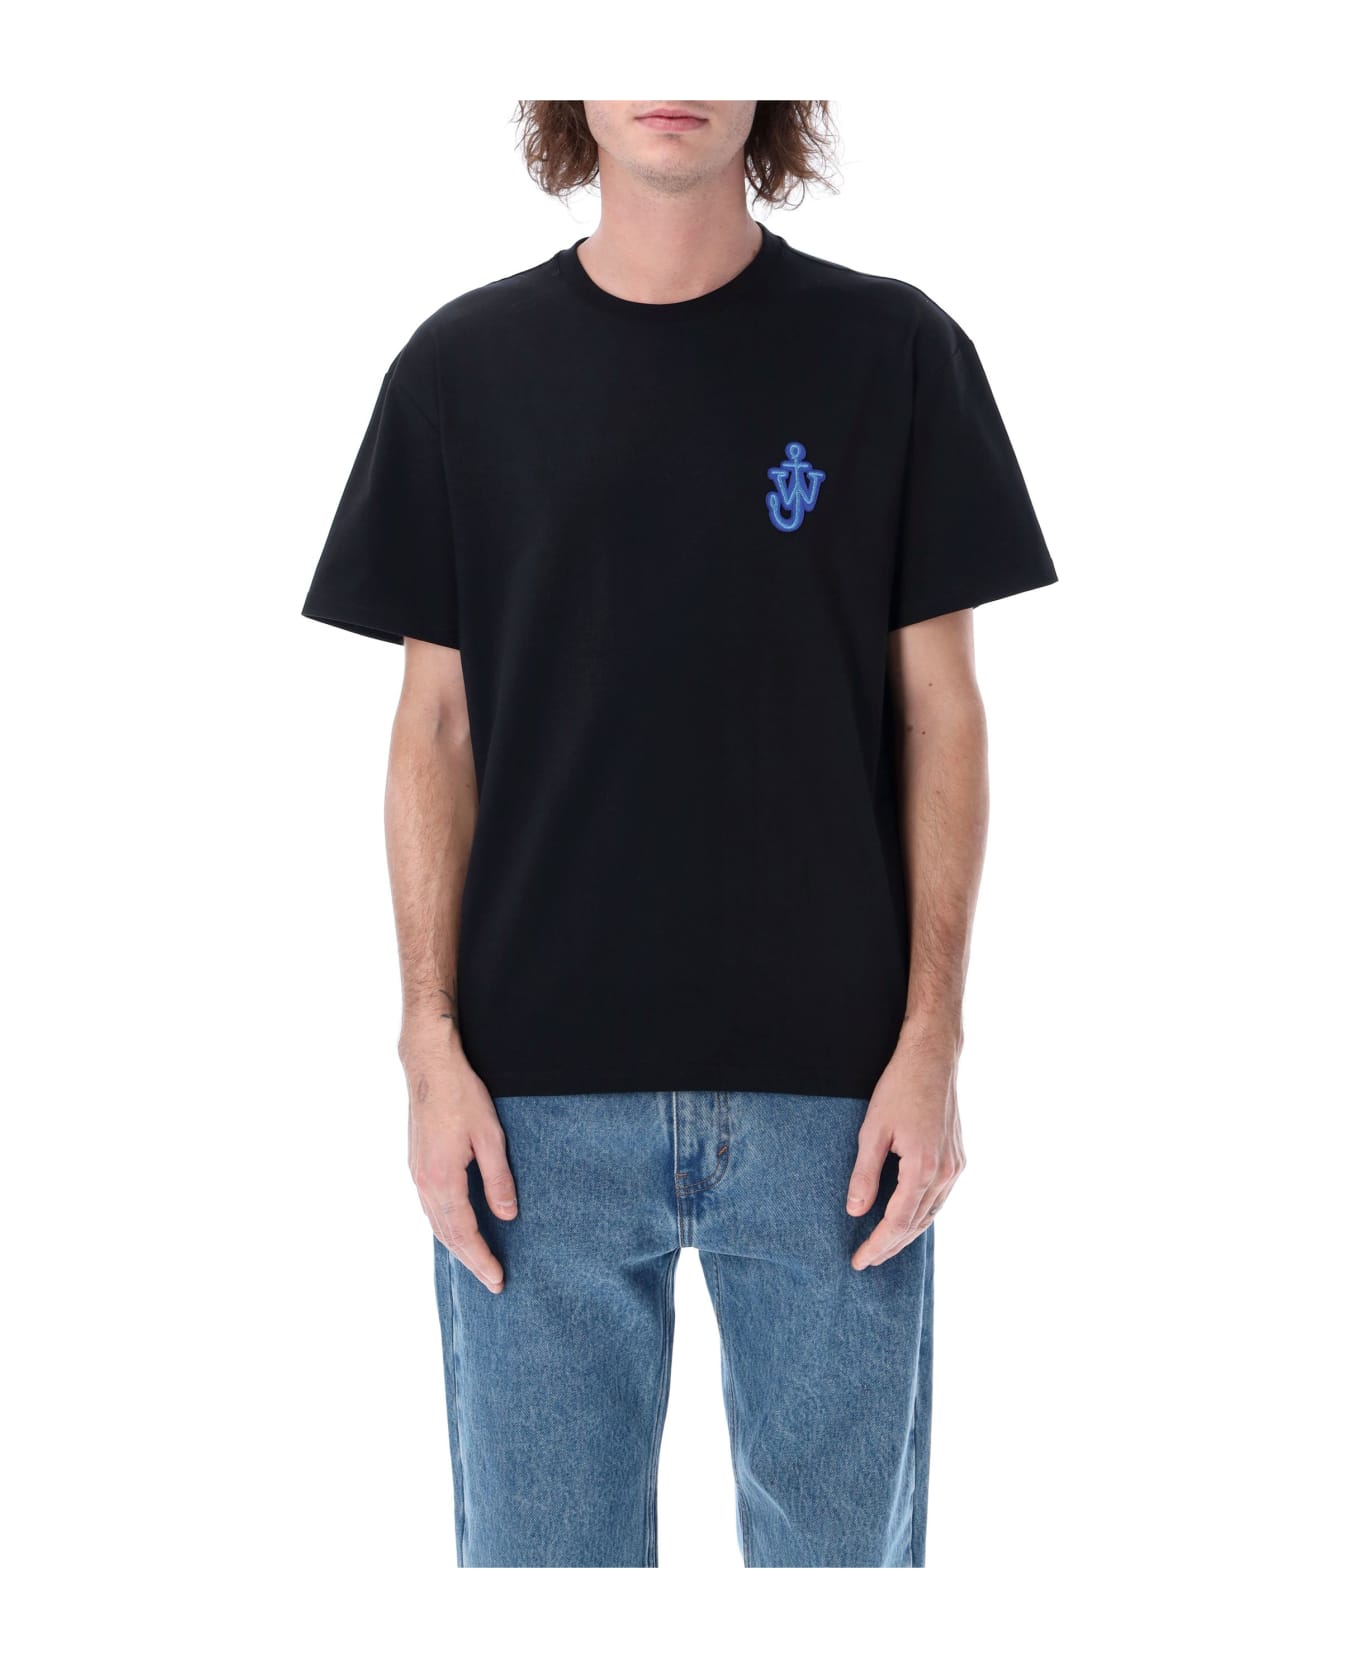 J.W. Anderson Anchor Patch T-shirt - BLACK シャツ